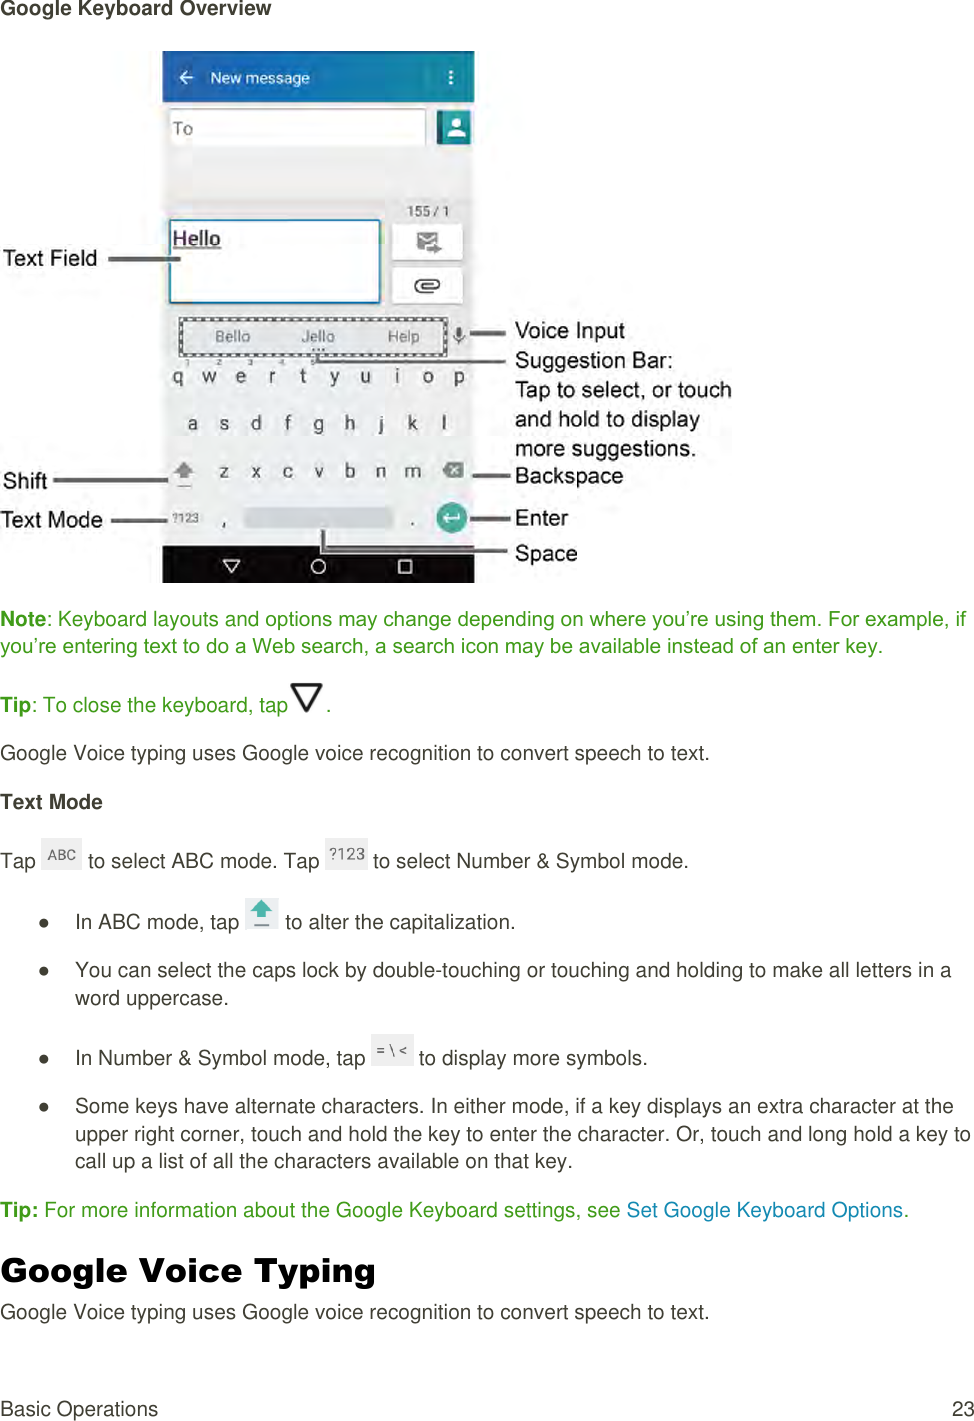 Basic Operations  23 Google Keyboard Overview    Note: Keyboard layouts and options may change depending on where you’re using them. For example, if you’re entering text to do a Web search, a search icon may be available instead of an enter key. Tip: To close the keyboard, tap . Google Voice typing uses Google voice recognition to convert speech to text. Text Mode Tap   to select ABC mode. Tap   to select Number &amp; Symbol mode. ●  In ABC mode, tap   to alter the capitalization. ●  You can select the caps lock by double-touching or touching and holding to make all letters in a word uppercase. ●  In Number &amp; Symbol mode, tap   to display more symbols. ●  Some keys have alternate characters. In either mode, if a key displays an extra character at the upper right corner, touch and hold the key to enter the character. Or, touch and long hold a key to call up a list of all the characters available on that key. Tip: For more information about the Google Keyboard settings, see Set Google Keyboard Options. Google Voice Typing  Google Voice typing uses Google voice recognition to convert speech to text. 